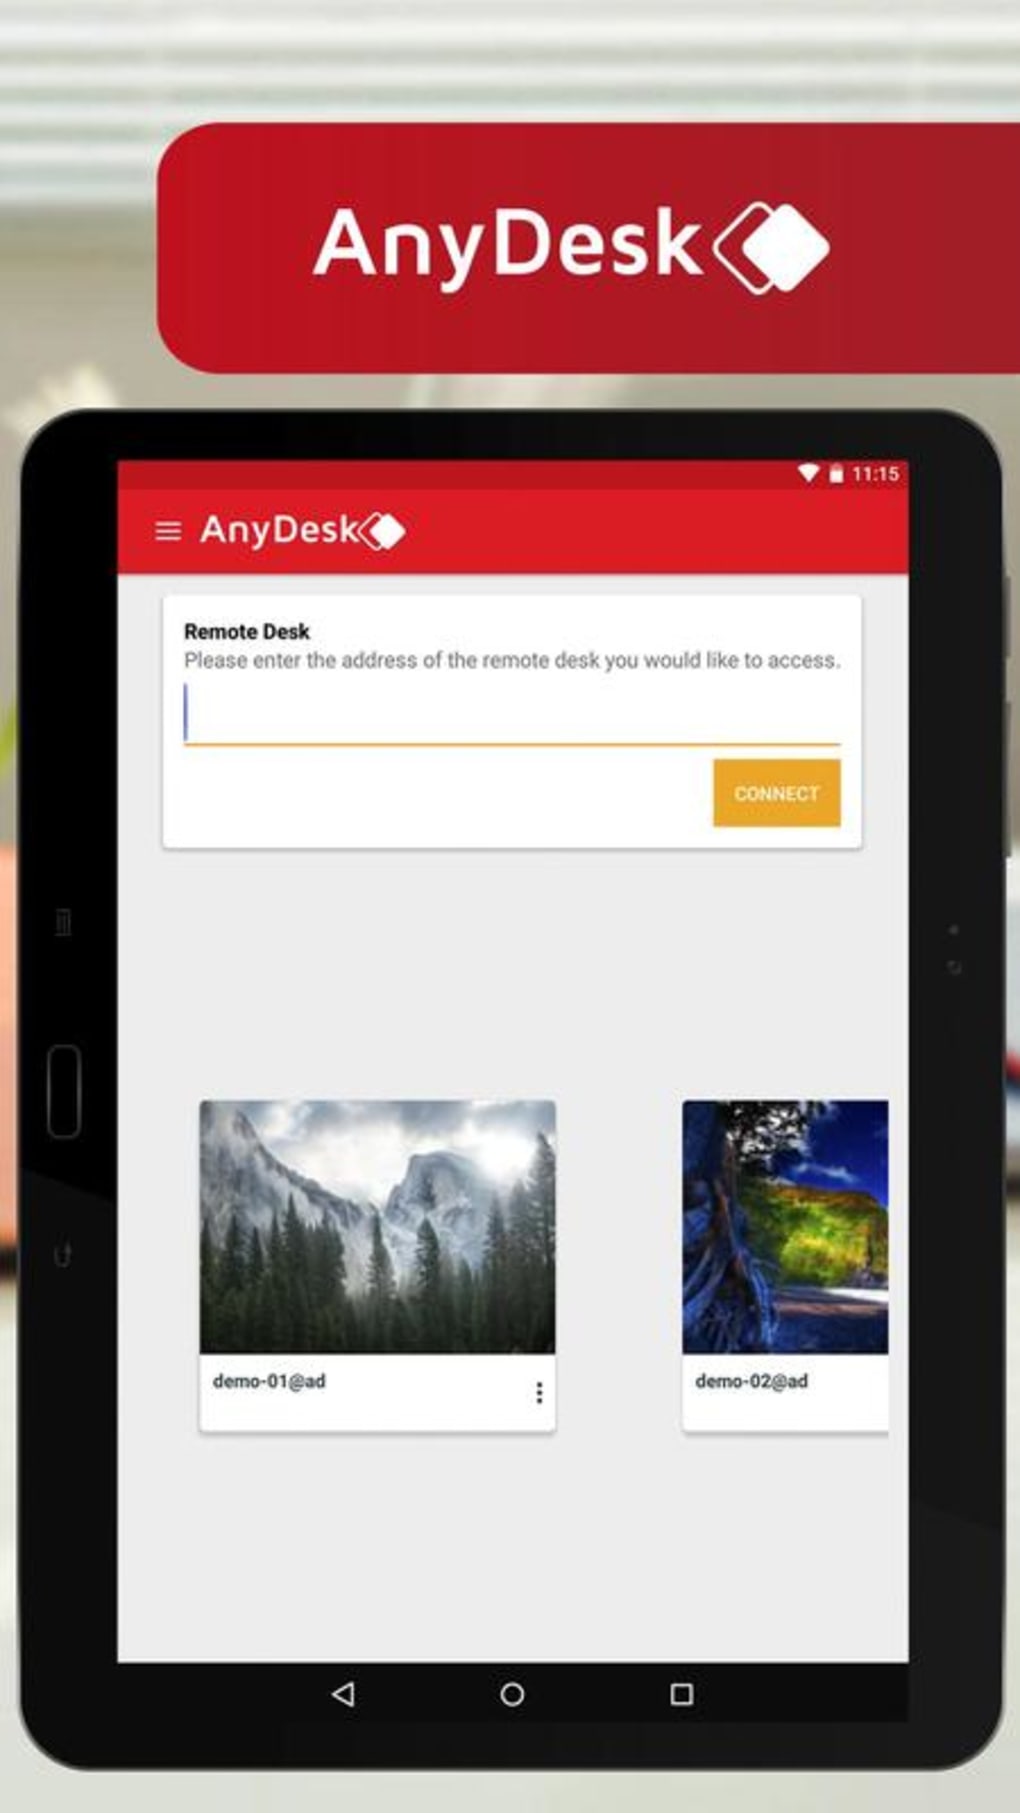 anydesk download free